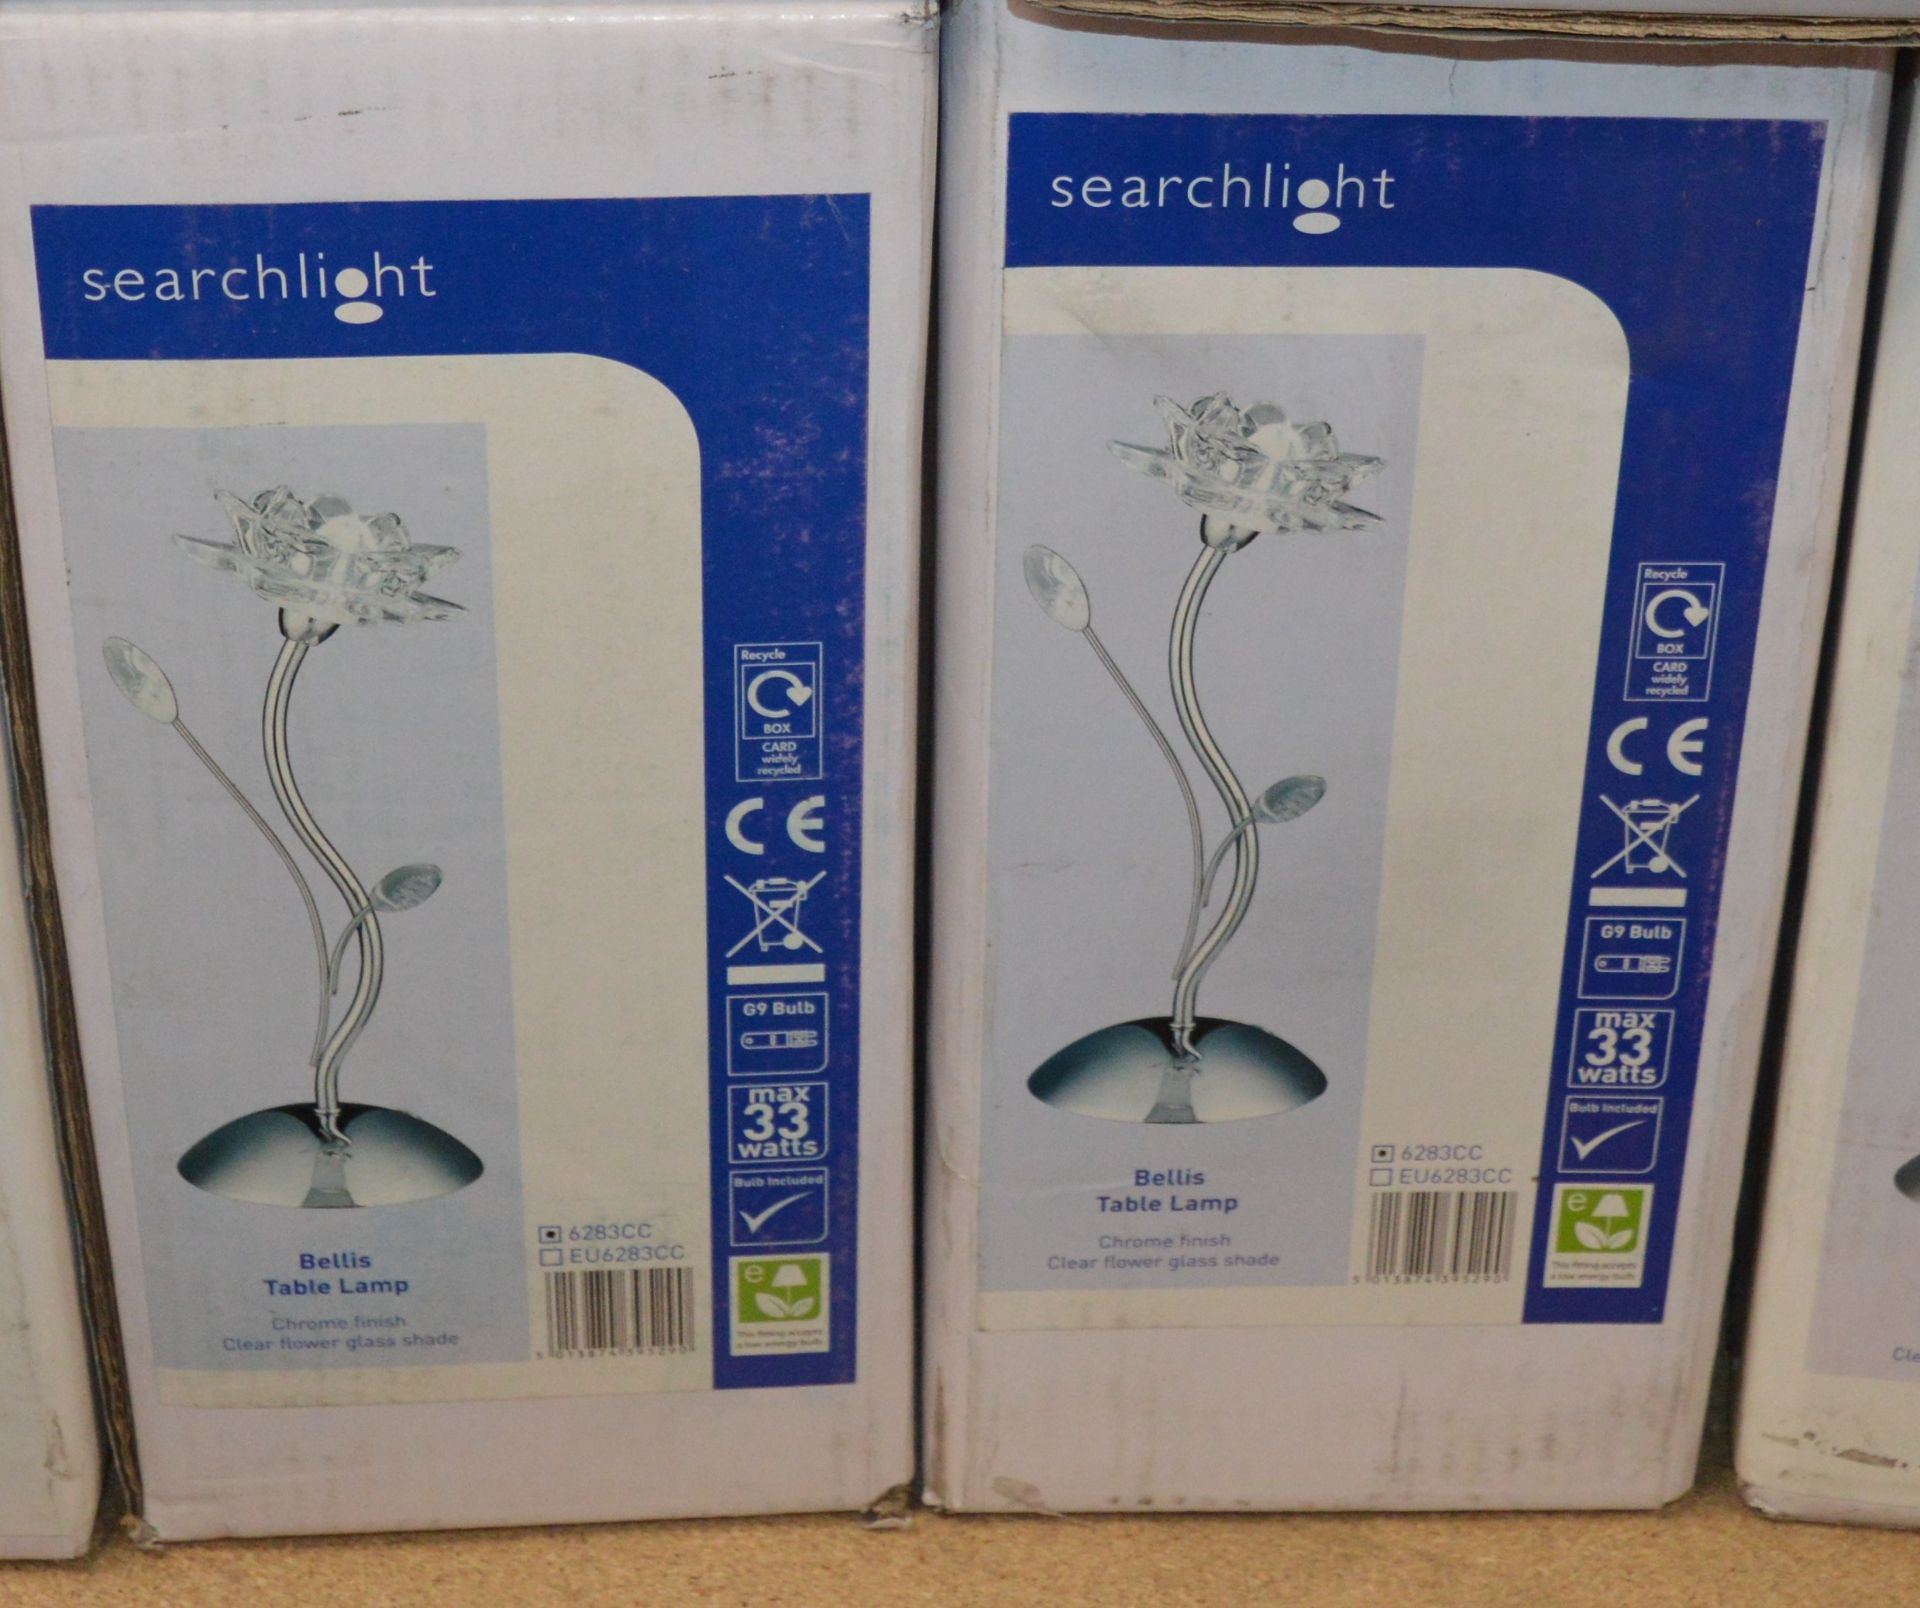 2 x Searchlight Bellis Table Lamps With Chrome Finish and Clear Flower Glass Shades - Product Code